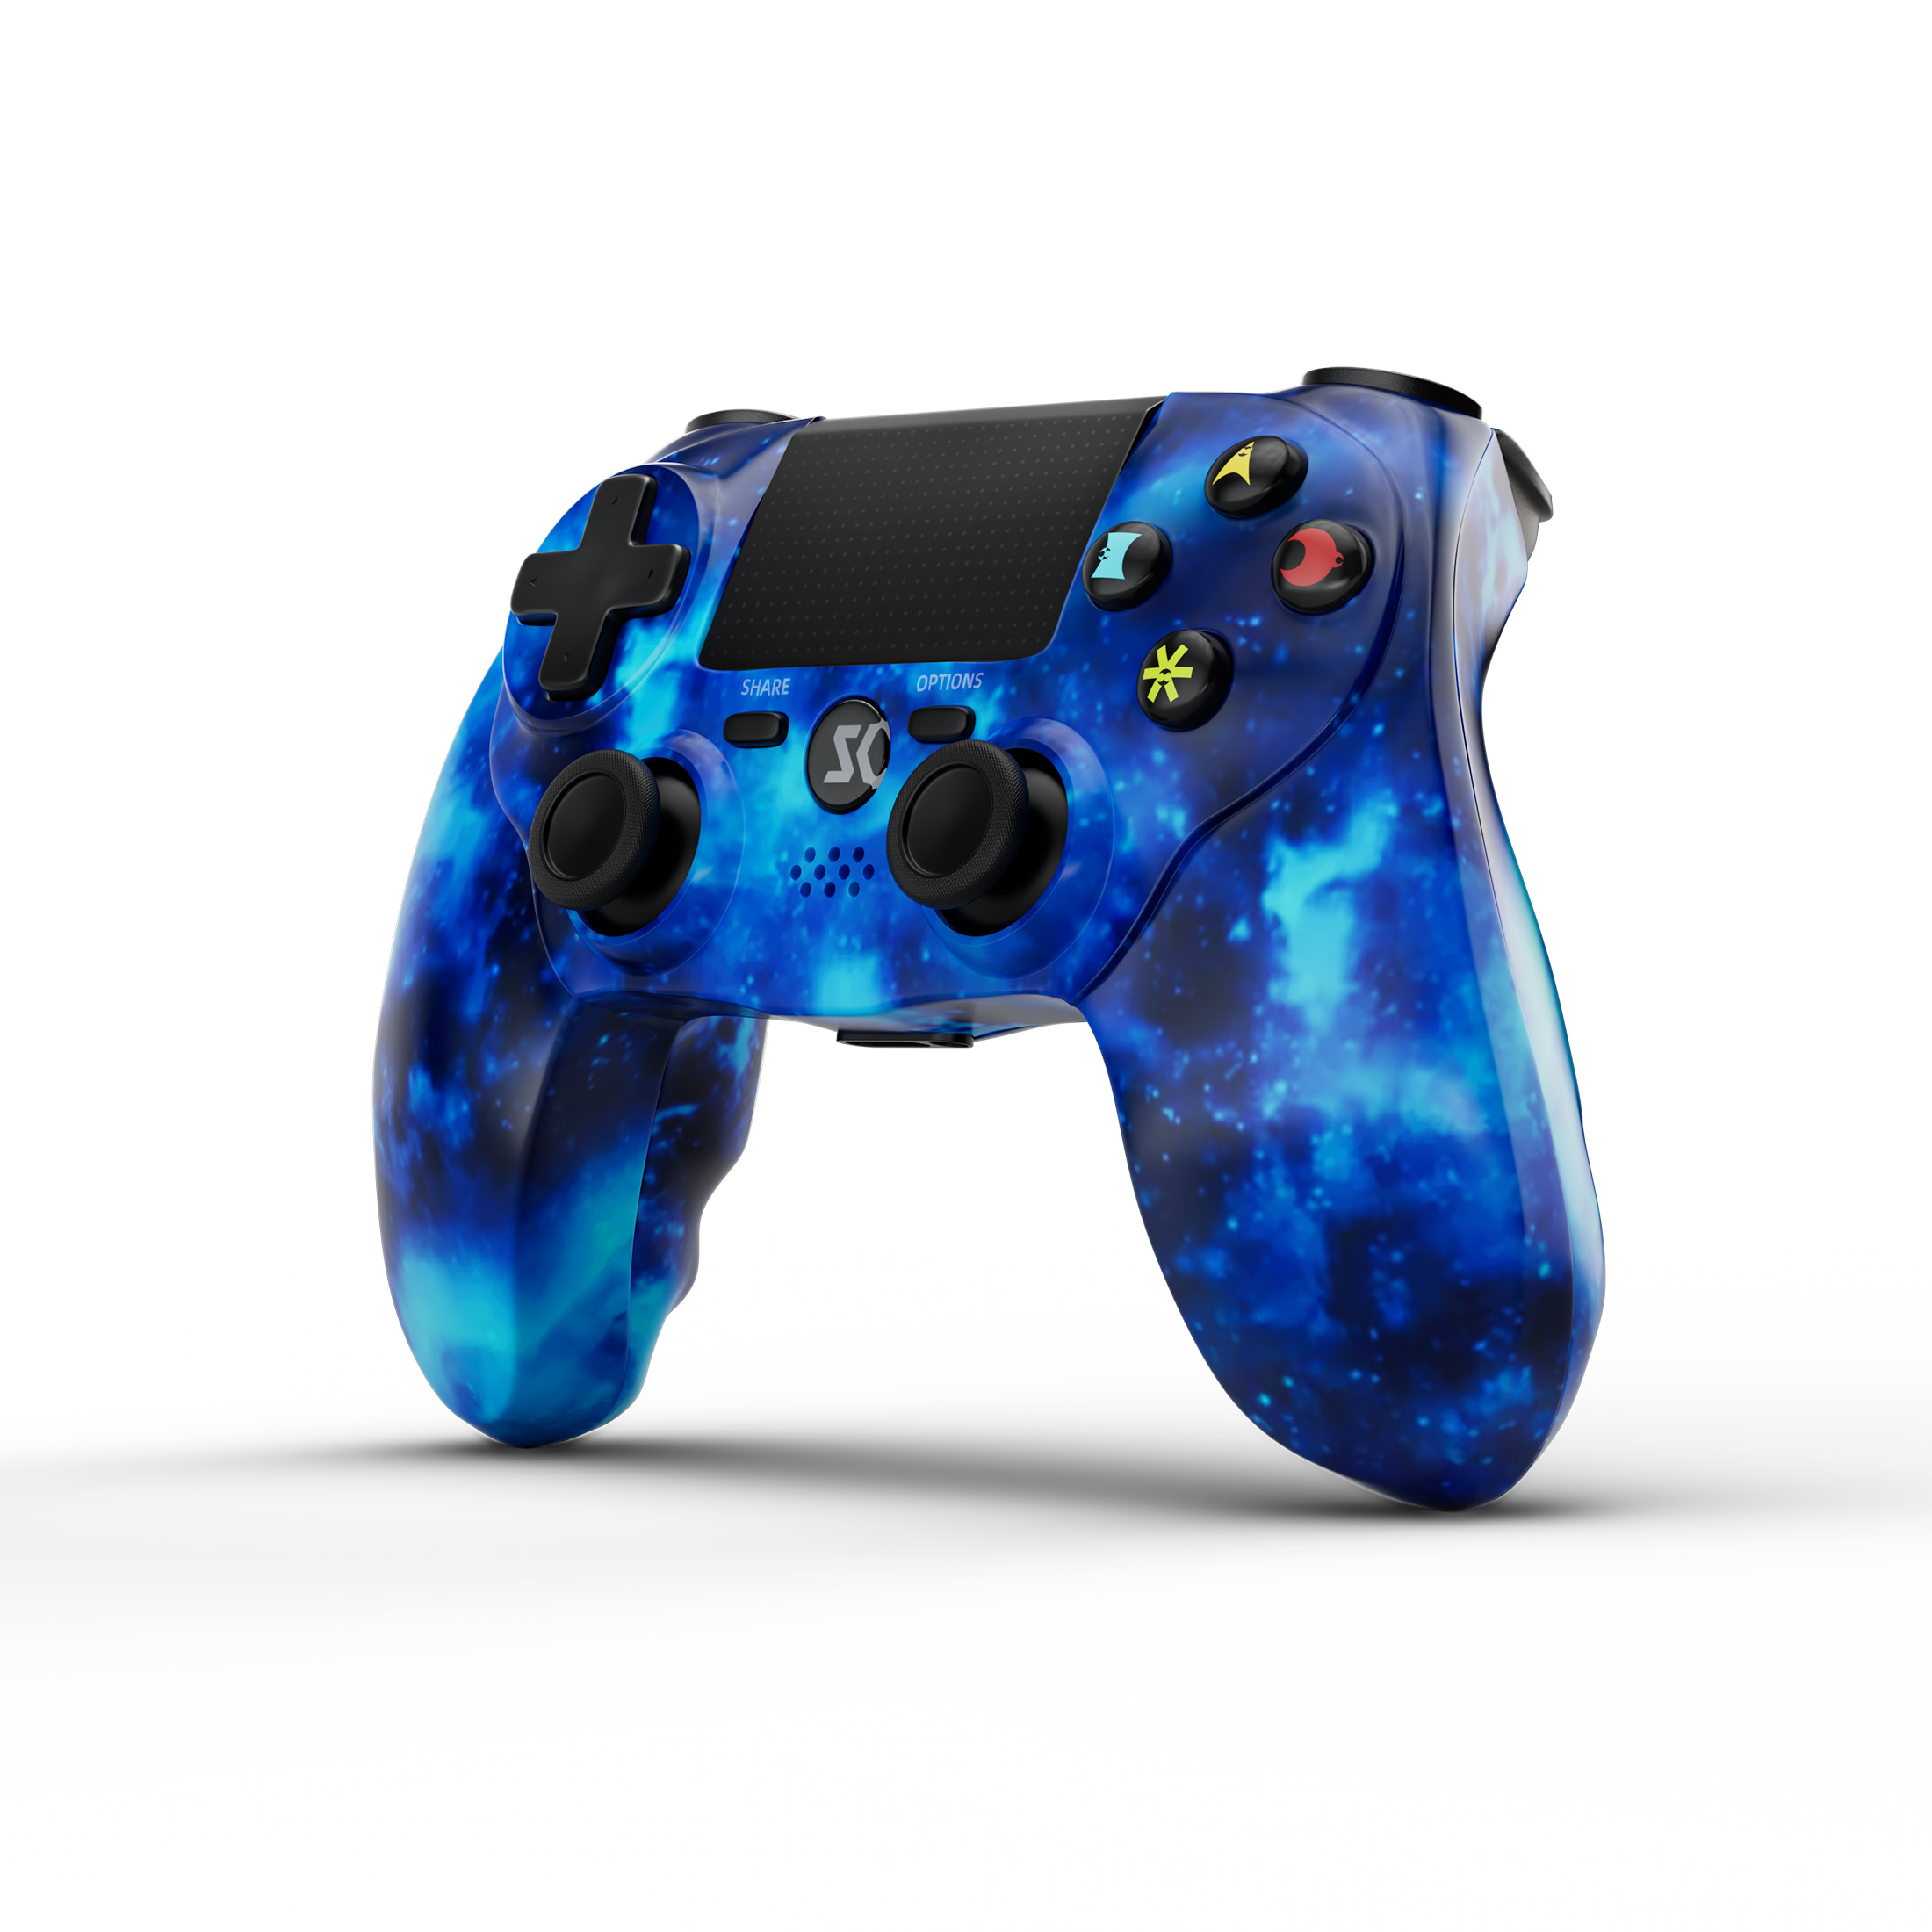 CHENGDAO Wireless Controller for Playstation 4, Double Vibration